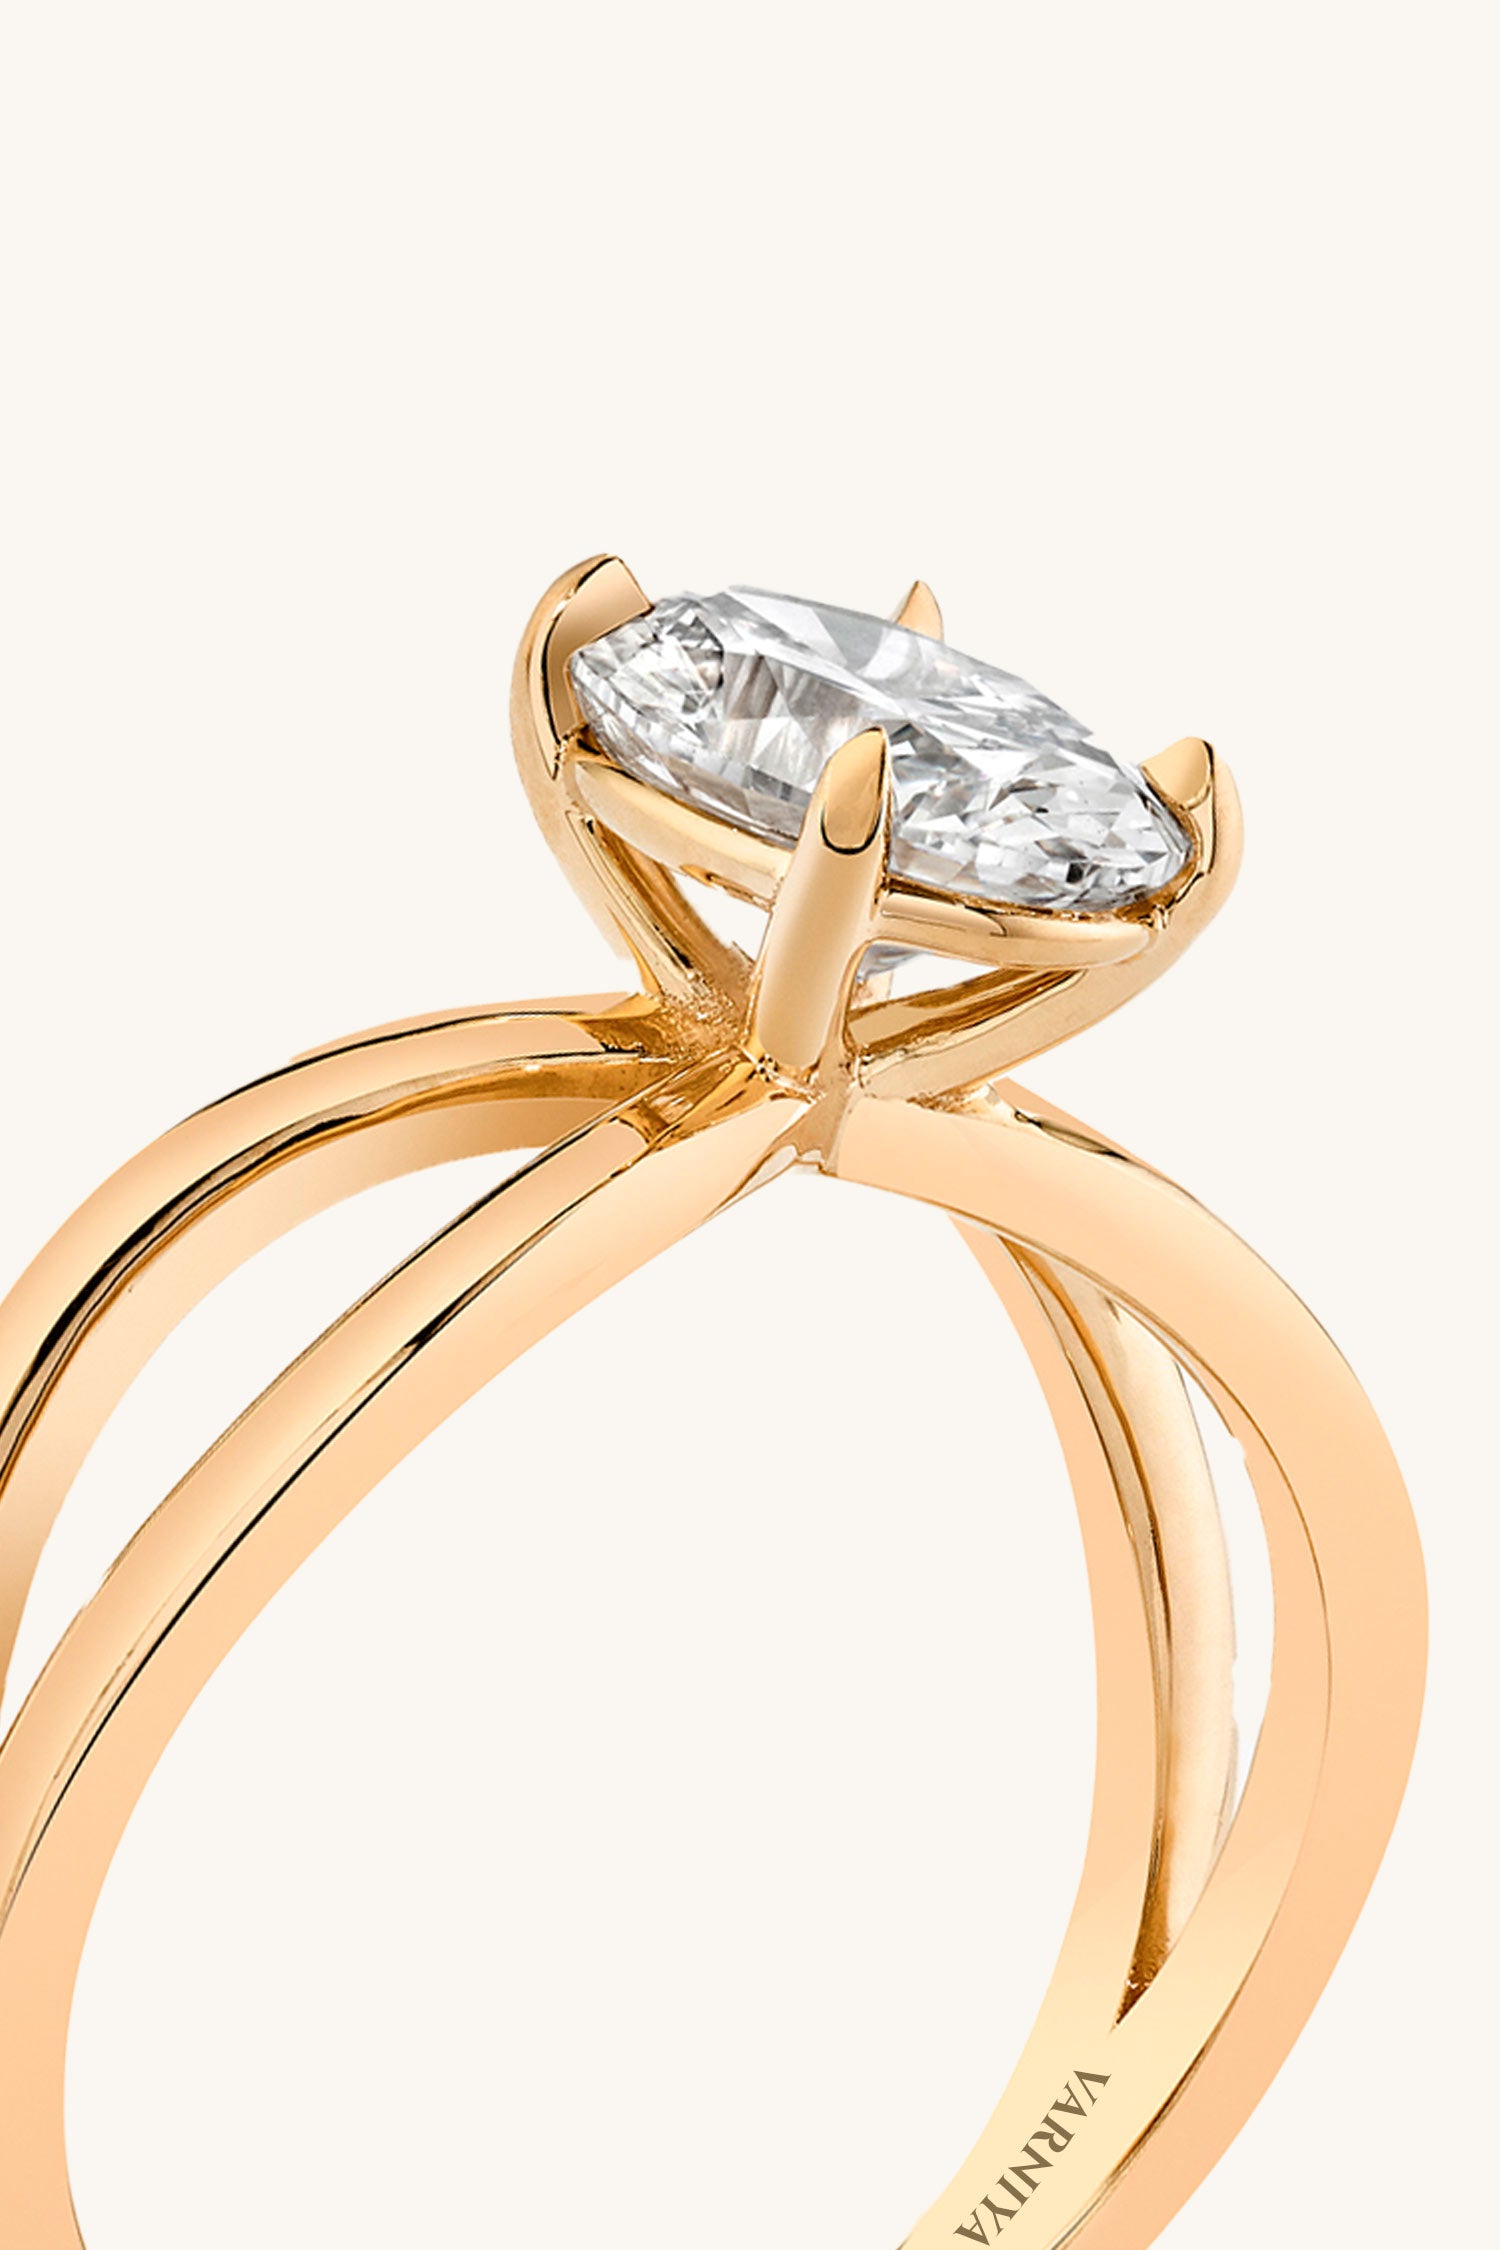 Luisa Oval Solitaire Ring